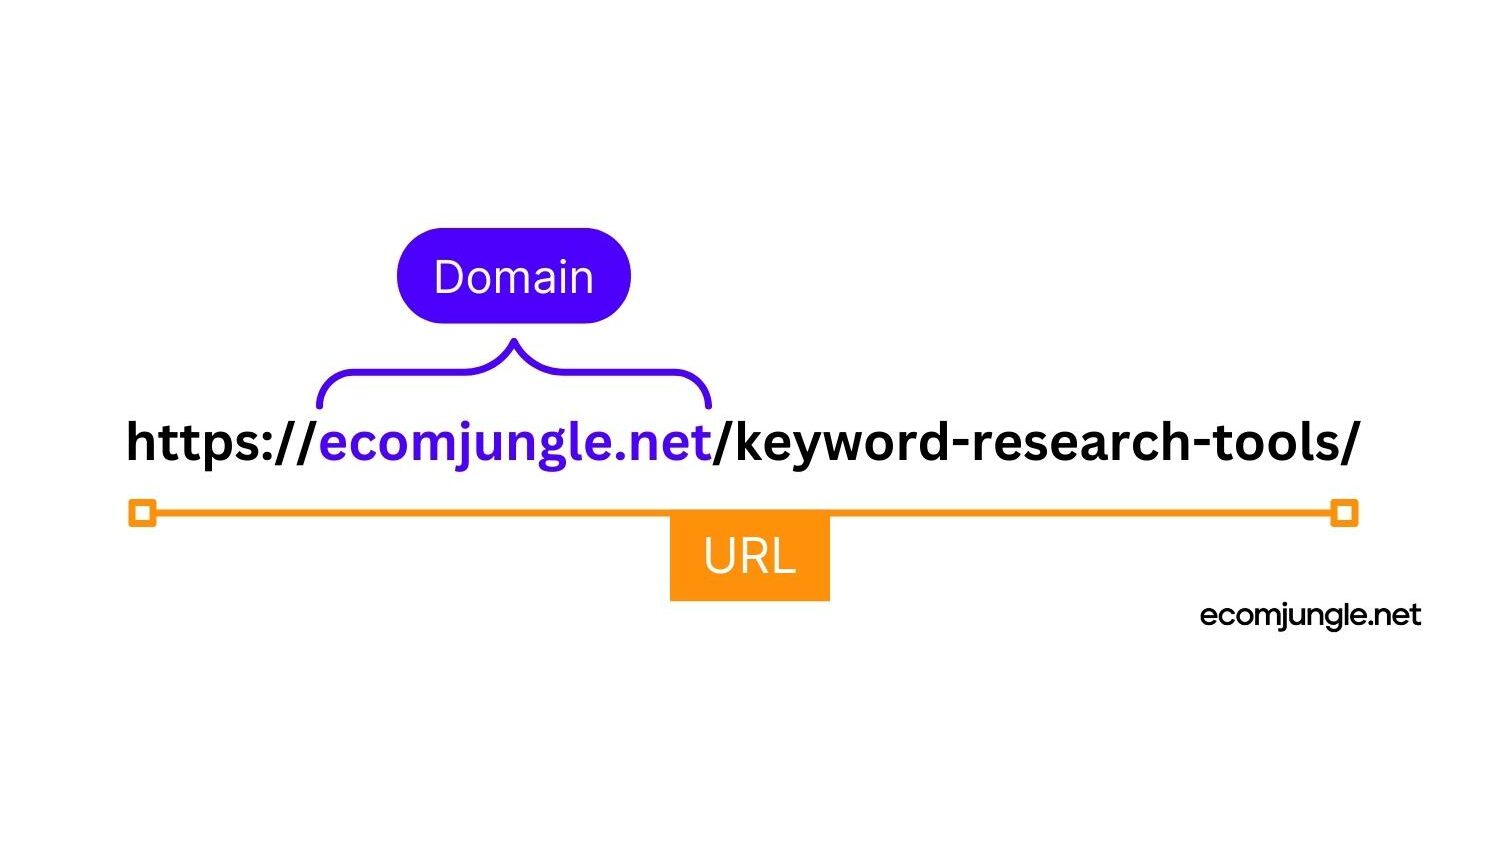 URL structure should be created friendly for SEO and buyers who want to find your online store.